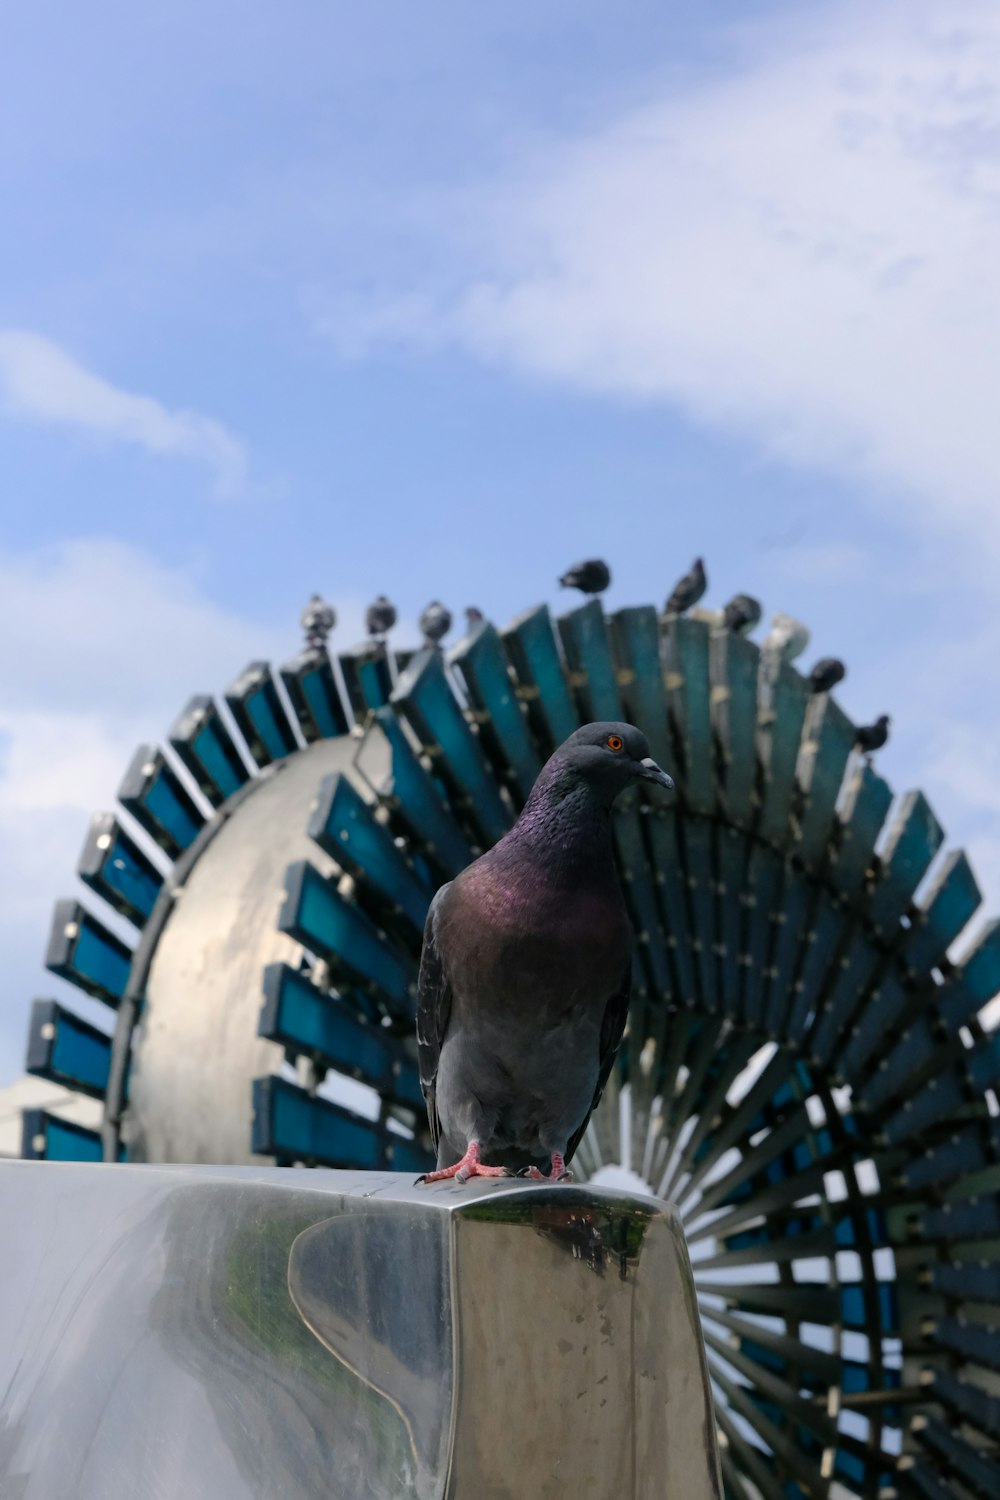 a pigeon sitting on top of a metal object